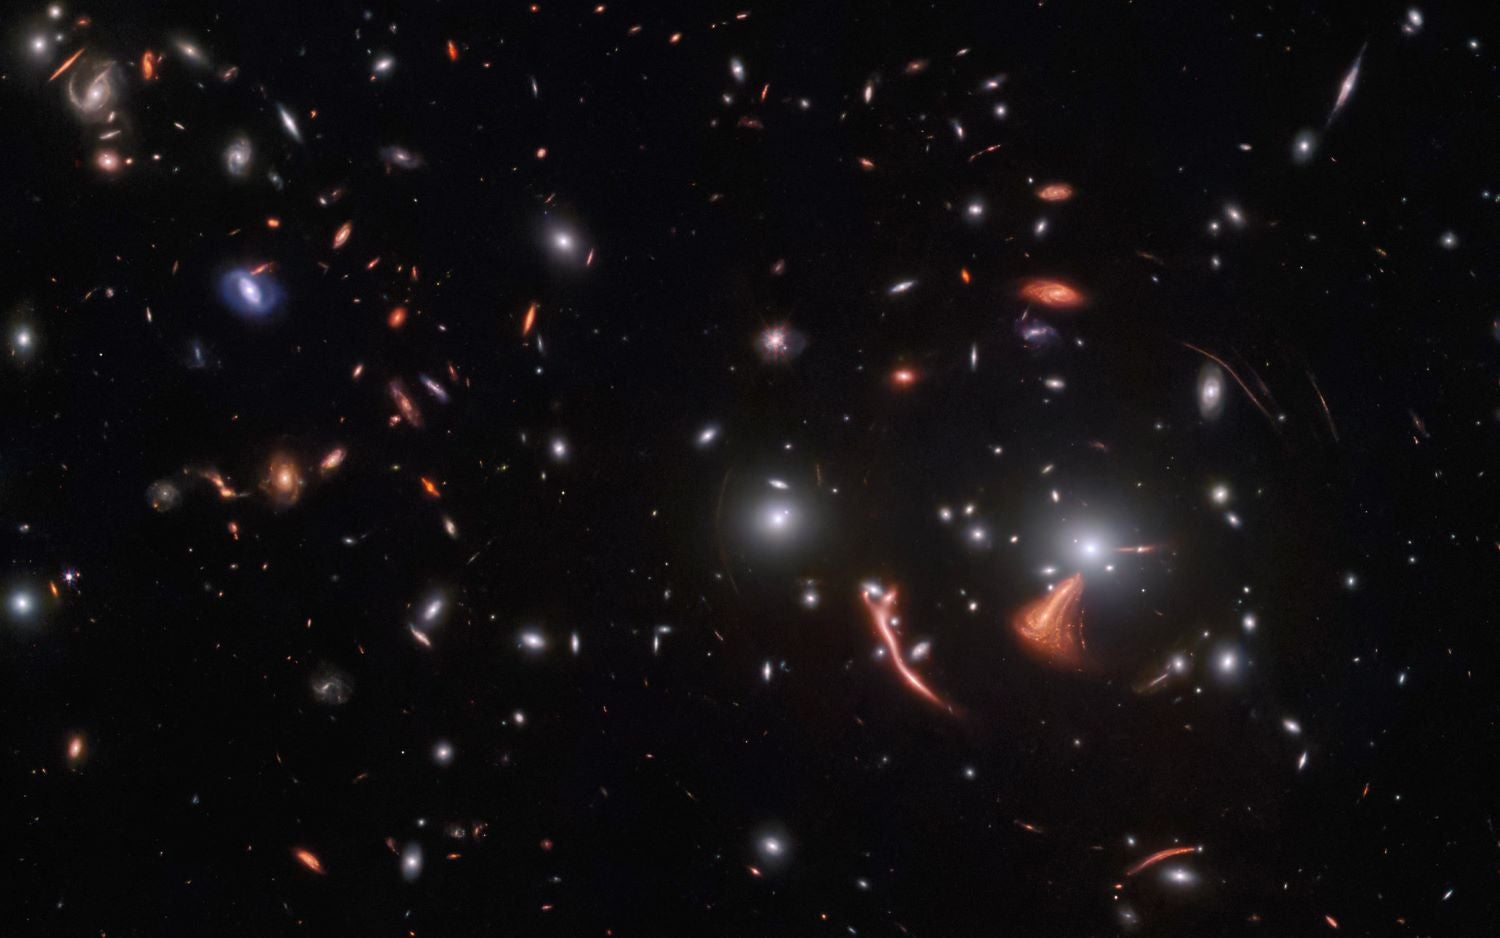 Galaxies distorted by the phenomenon known as gravitational lensing.